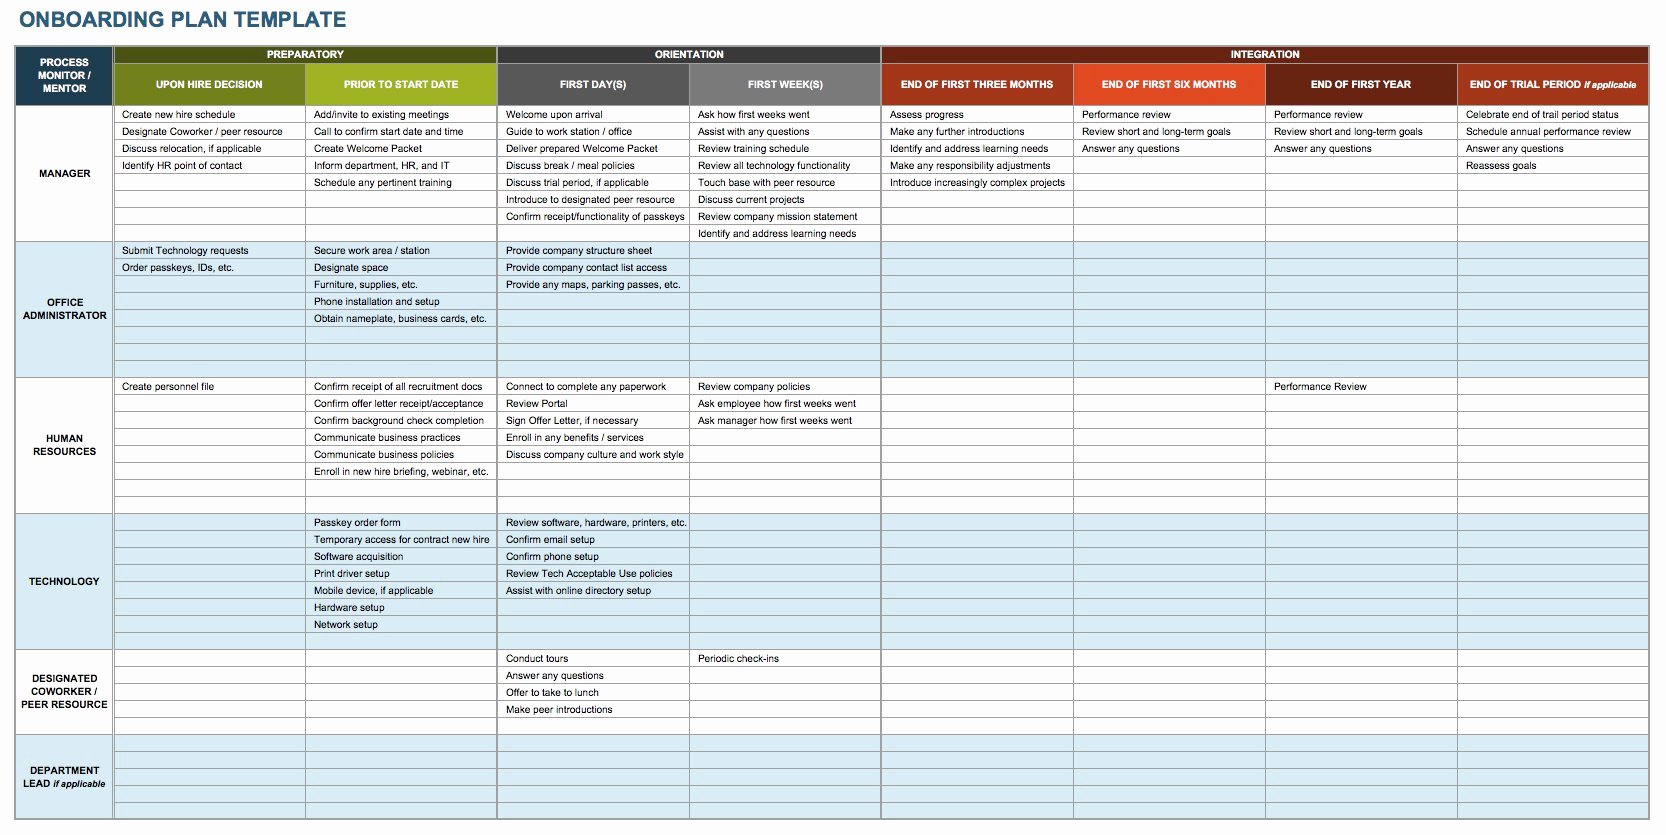 90 Day Onboarding Plan Template Lovely Free Boarding Checklists and Templates